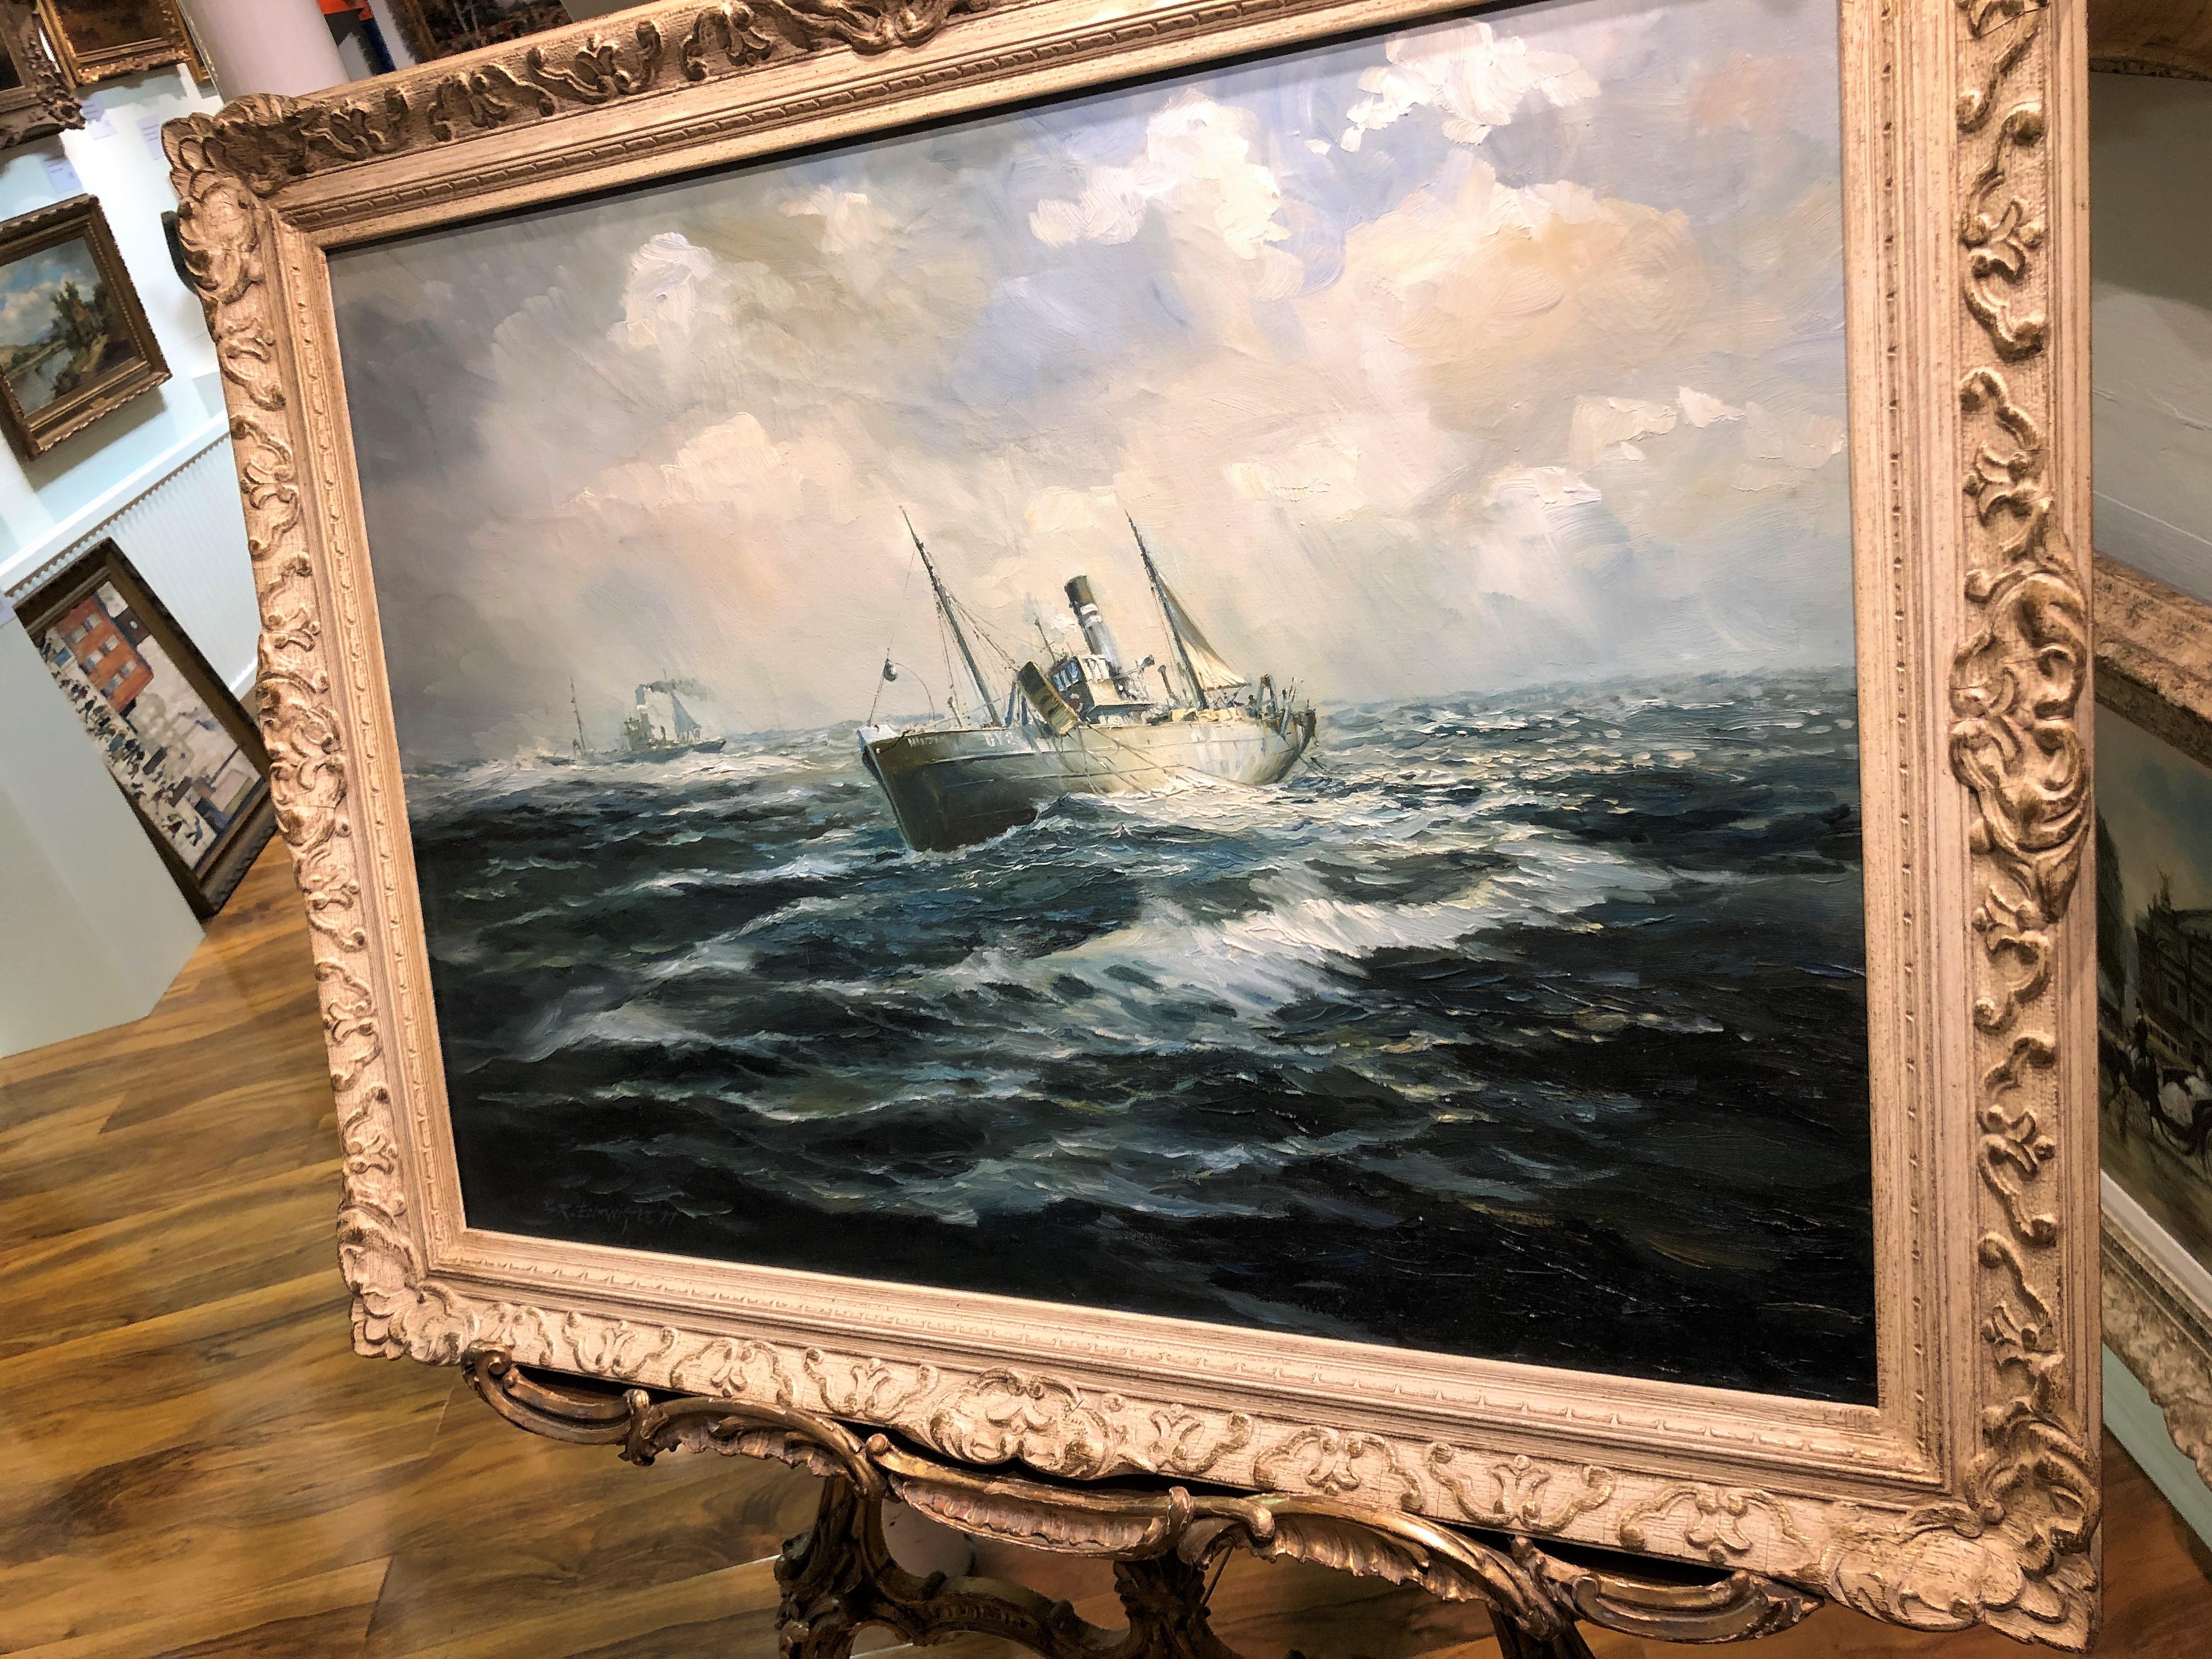 LARGE OIL PAINTING By B . R . ENTWISTLE 20th Century ( OLD MASTER STYLE)
 
Fine Original 20th Century British OLD MASTER STYLE OIL PAINTING

Romantic Sea Scene GOLD GILT FRAME

NEW COLLECTION Of RARE PIECES OF ENGLISH HISTORY

Excellent Condition